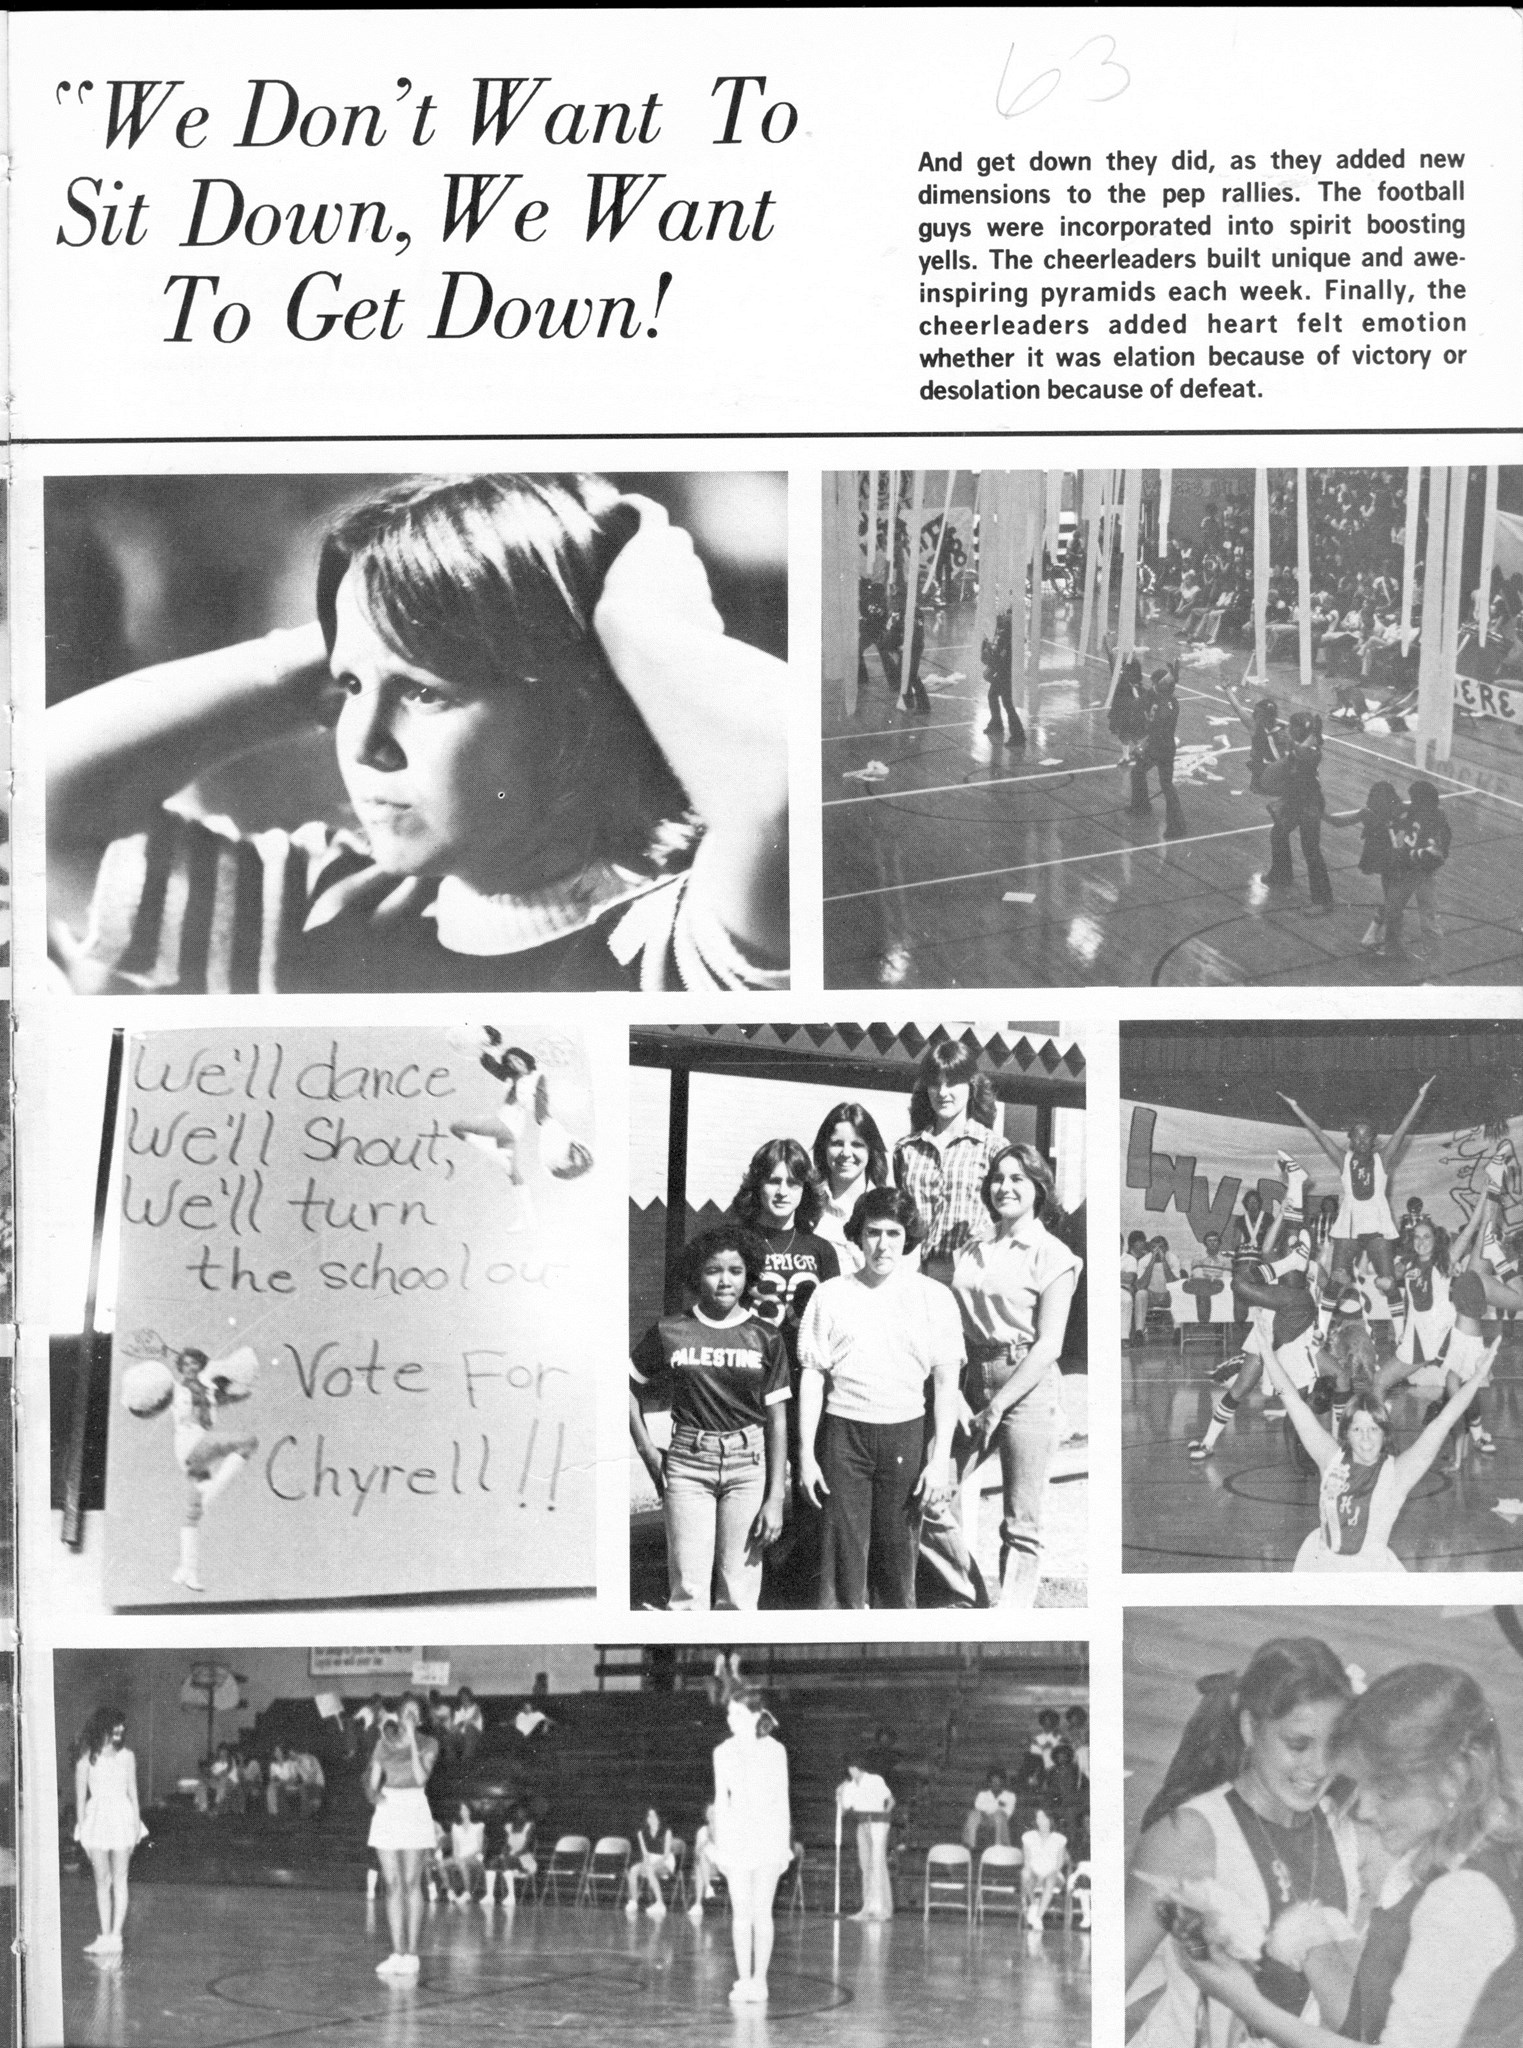 ../../../Images/Large/1979/Arclight-1979-pg0063.jpg